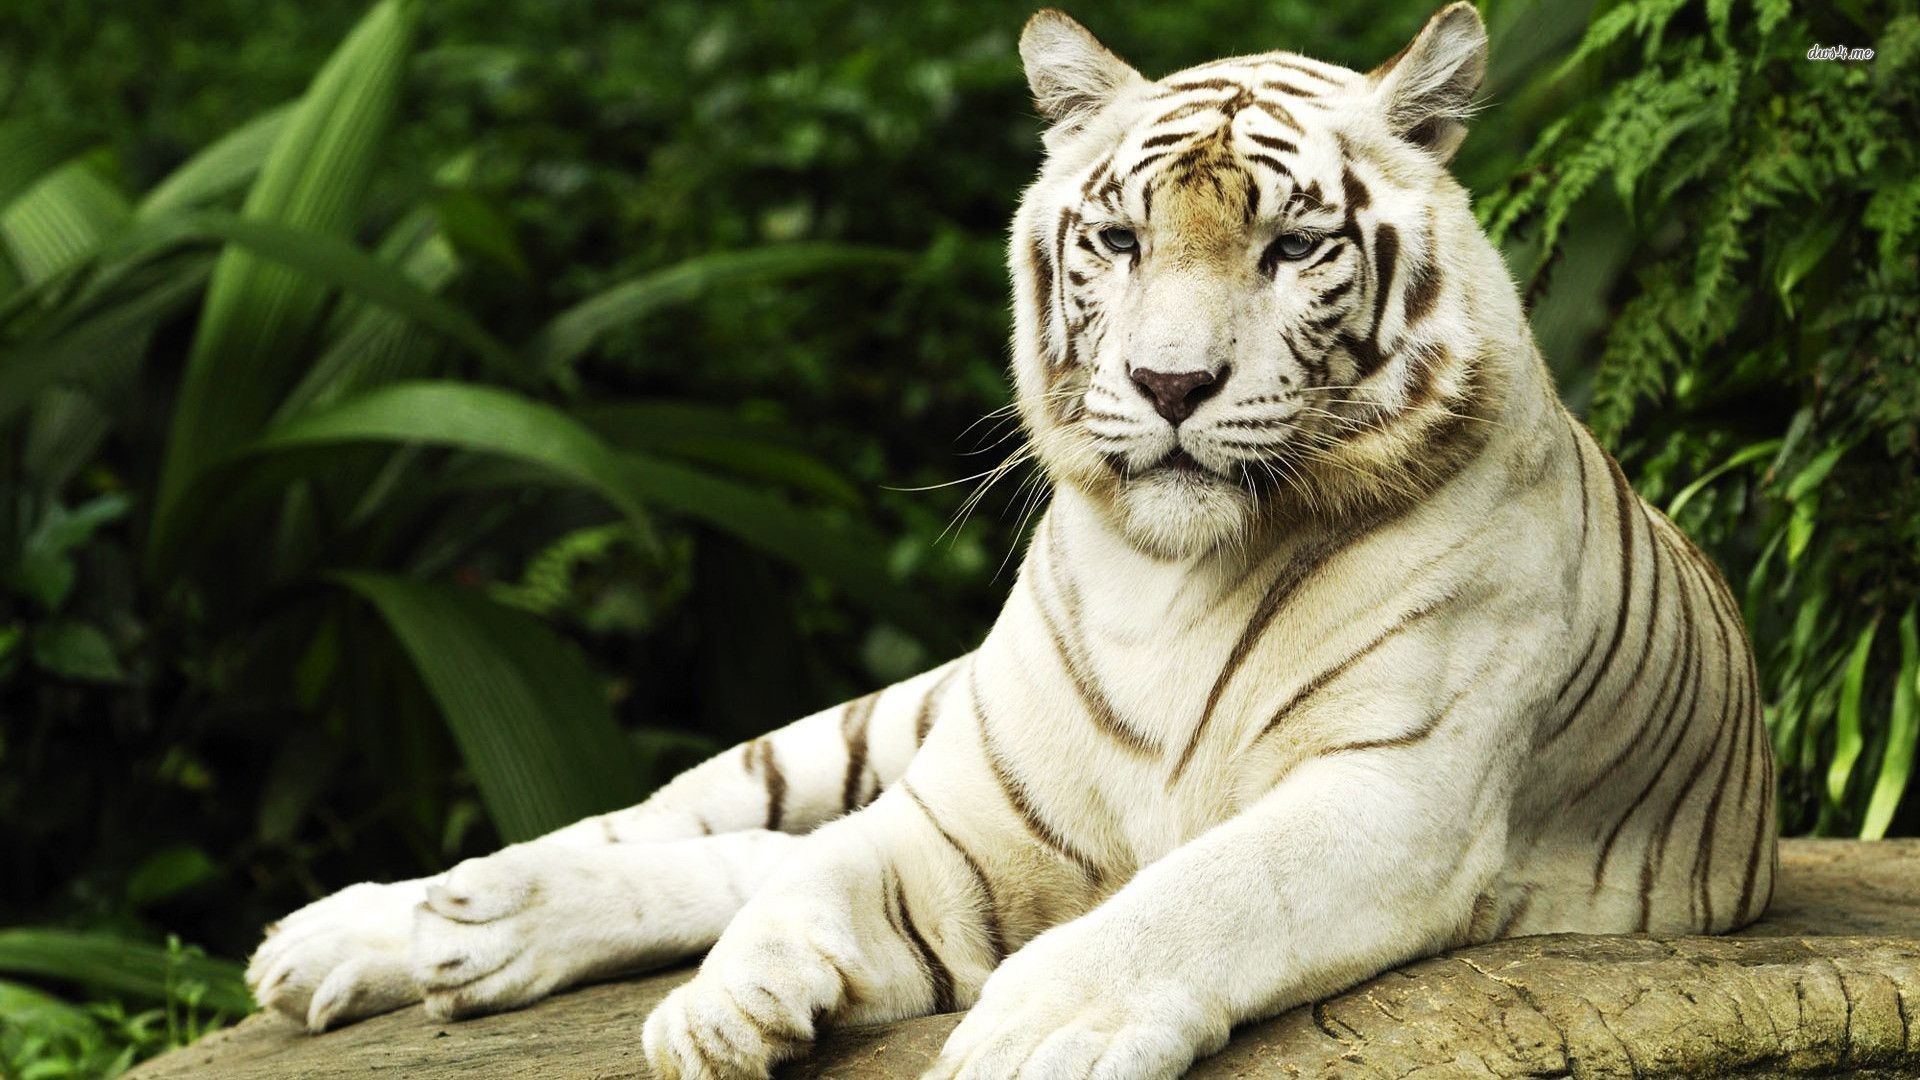 1920x1080  Animal White Tiger Cats Mobile Wallpaper | White Tiger Wallpaper  | Pinterest | Tiger wallpaper, Wallpaper and Tigers